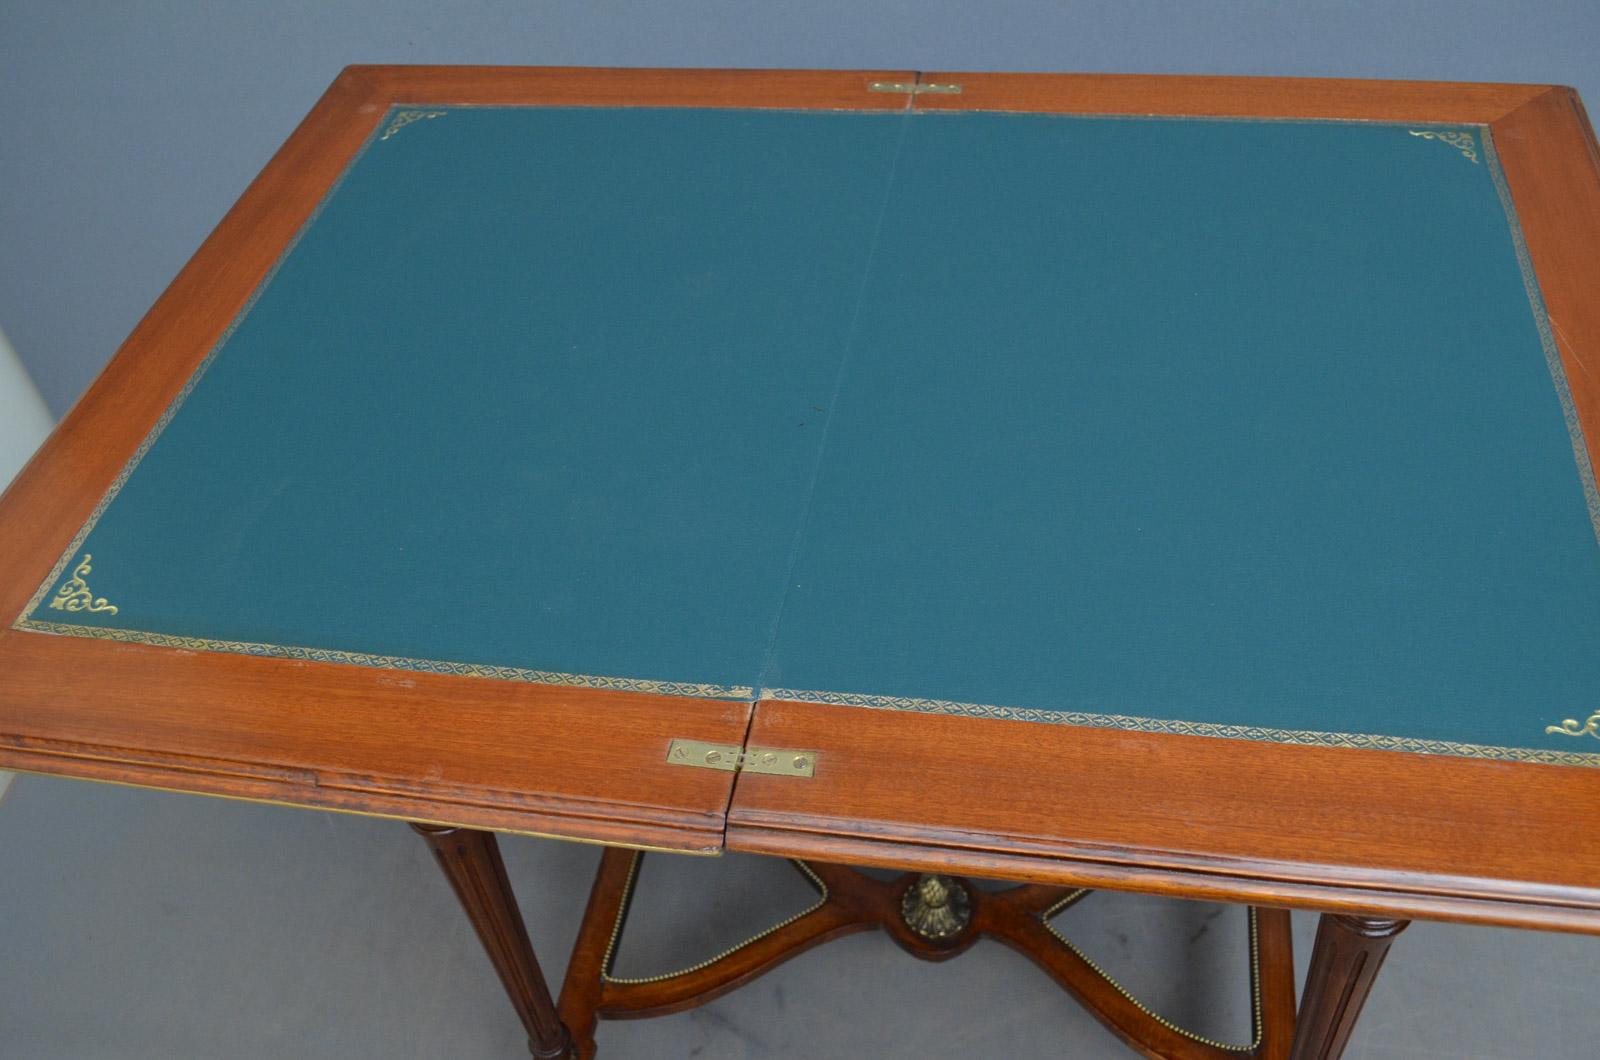 French Very Decorative Walnut Card Table For Sale